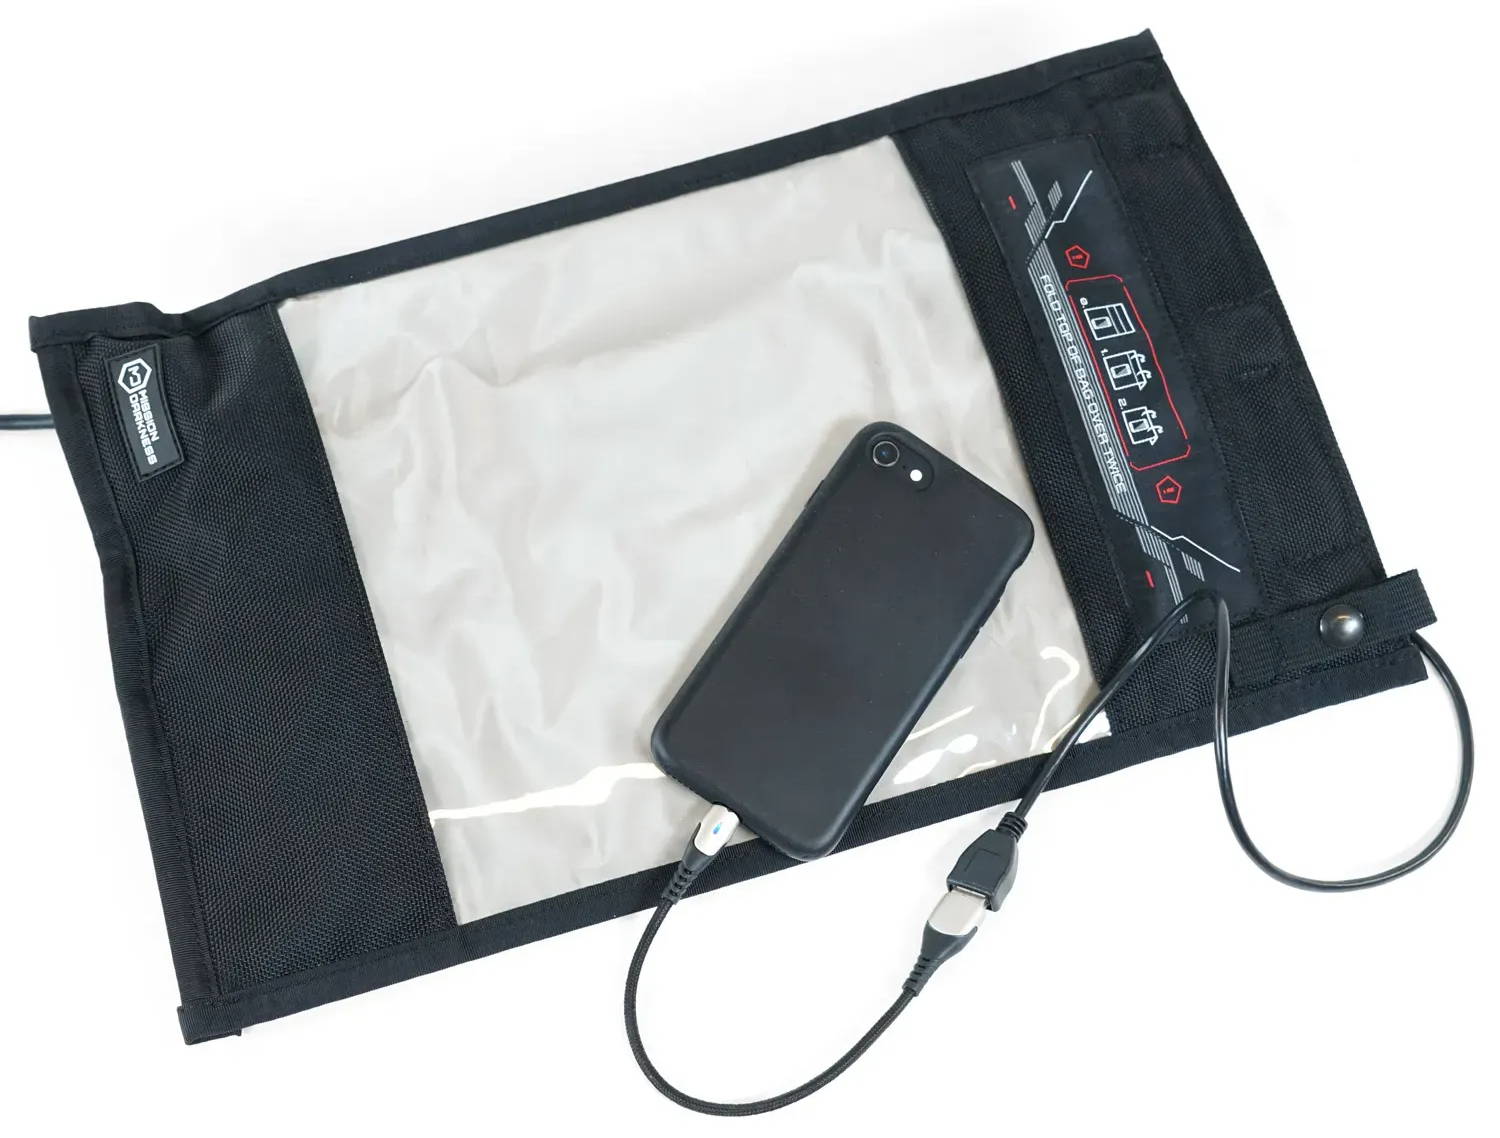 Mission Darkess Charge & Shield Faraday Bag offers shielded charging and data extraction capabilities